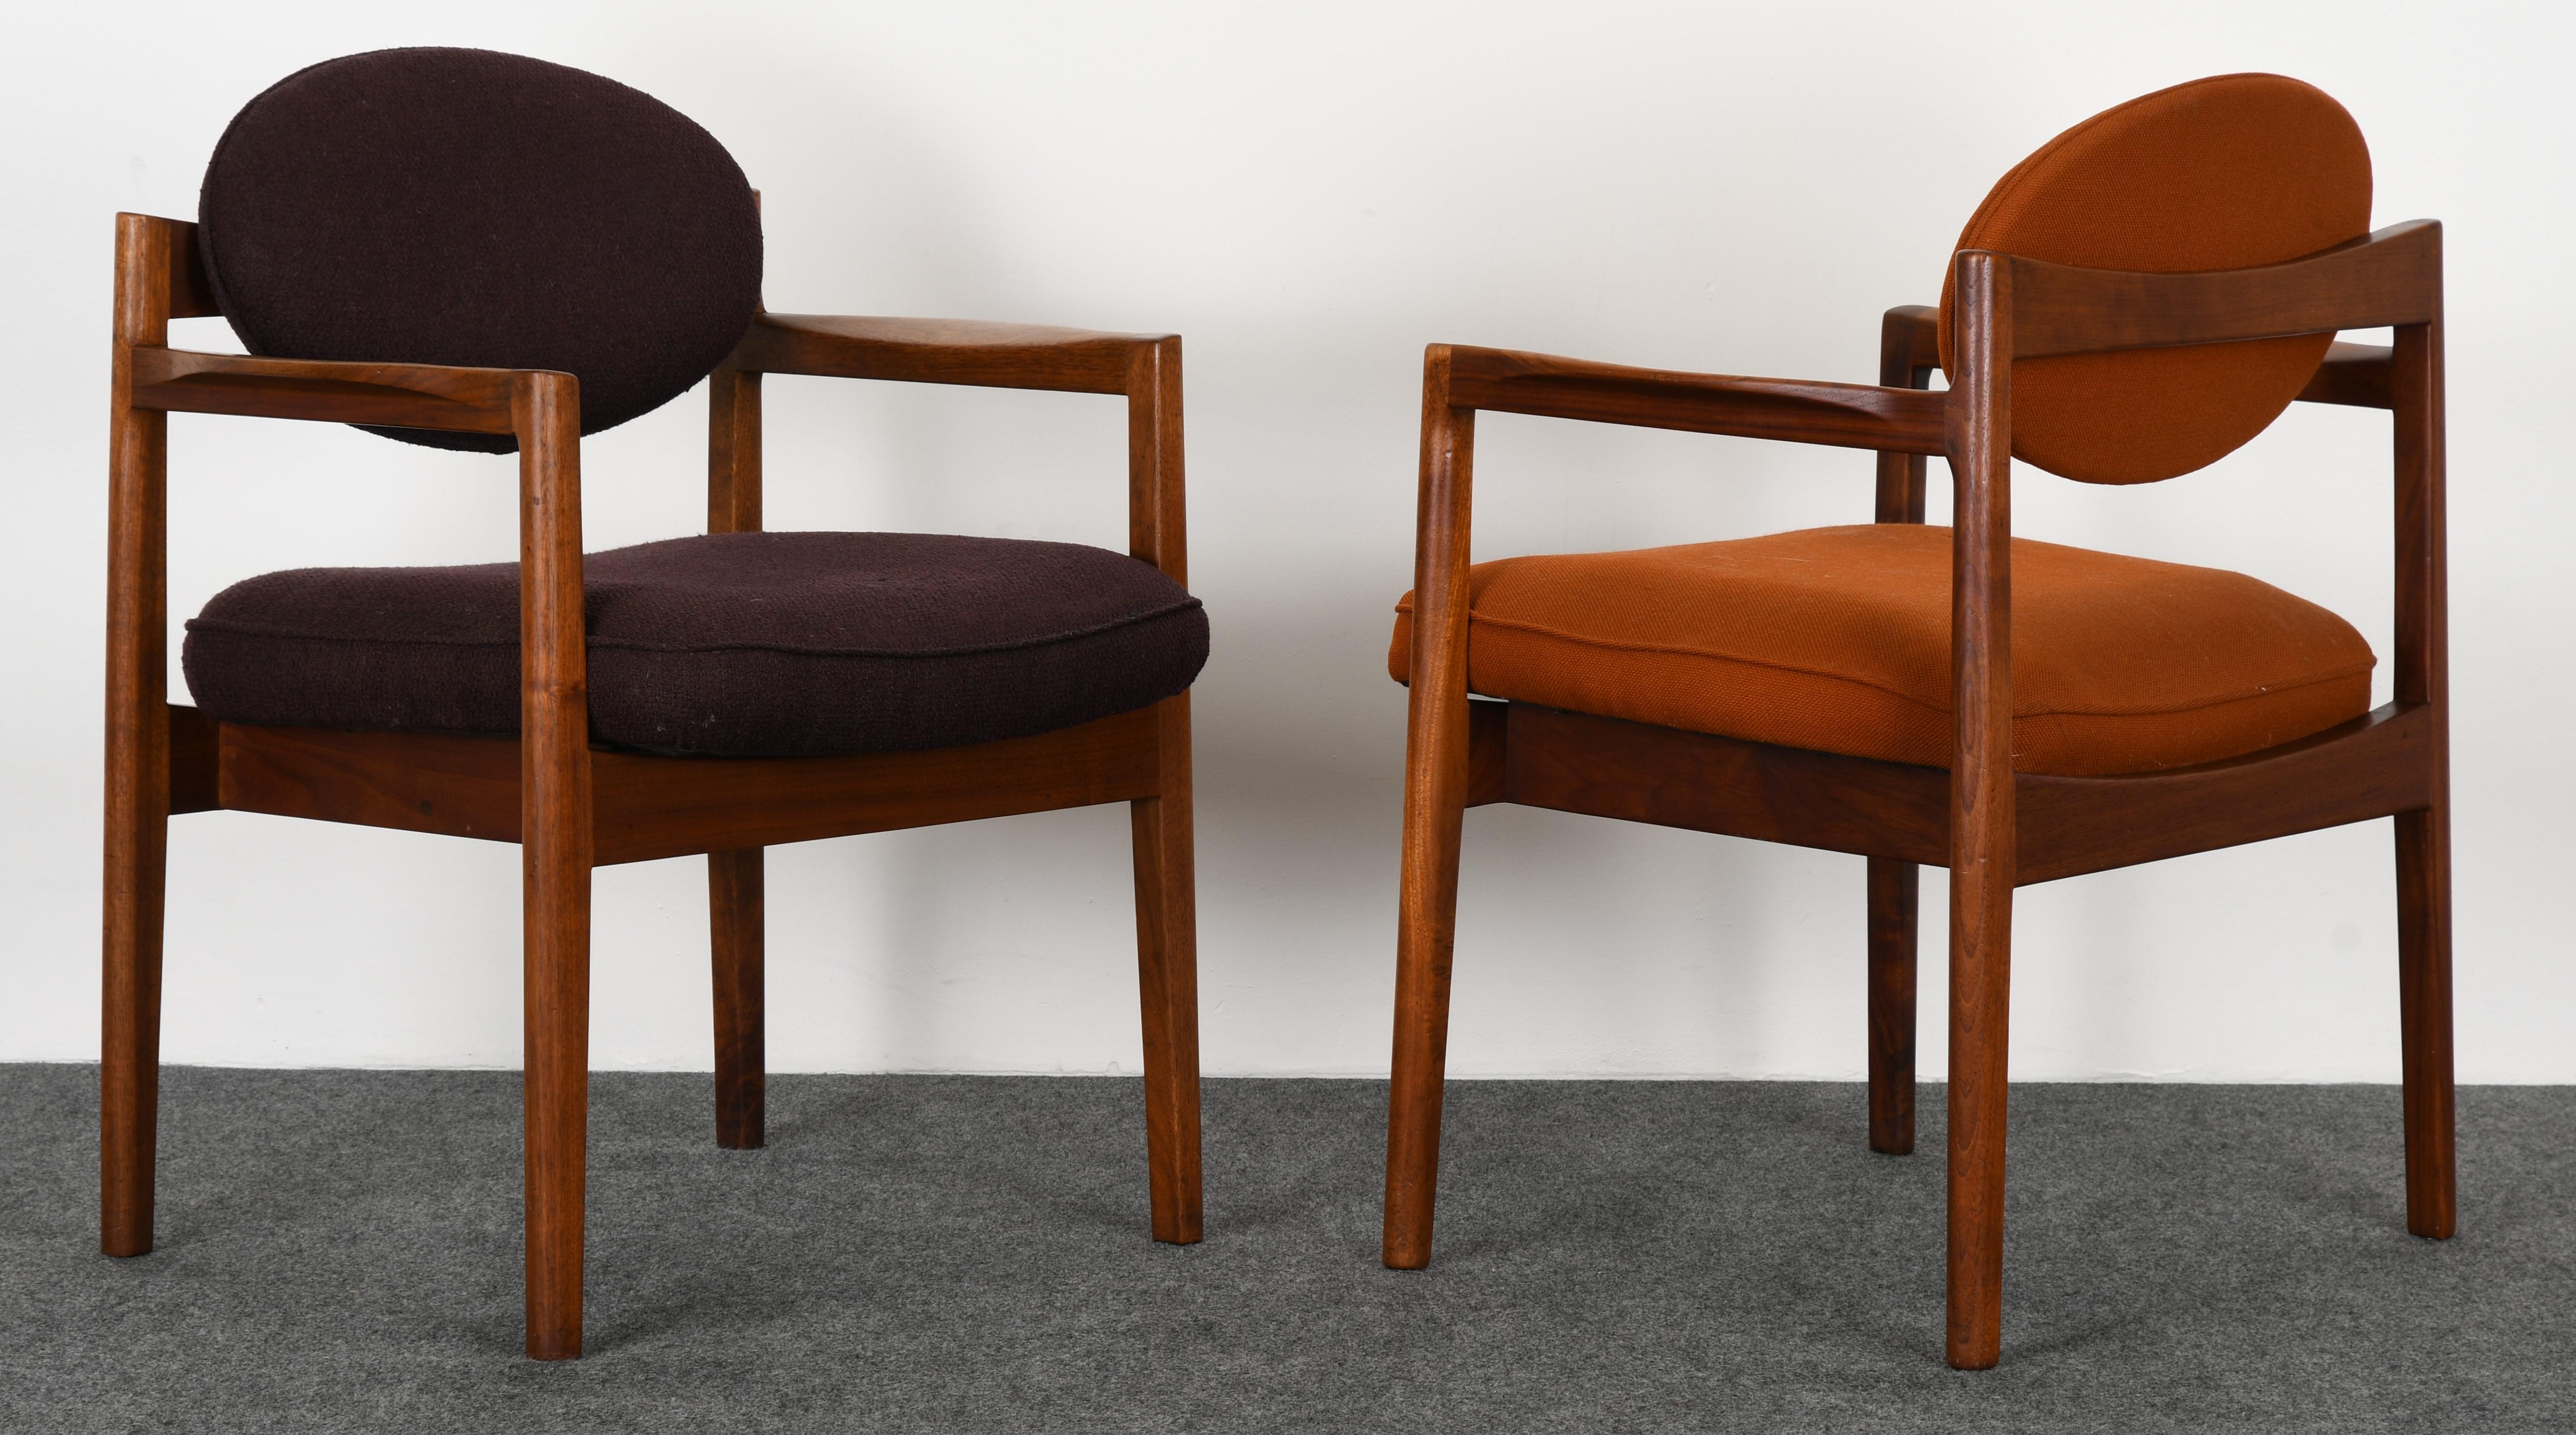 A sculptural pair of oval back armchairs by Jens Risom, 1960s. The chair frames are in good original condition. These retail new through Ralph Pucci International for $3,600 each. Marked with Risom insignia underside, as shown in images. New